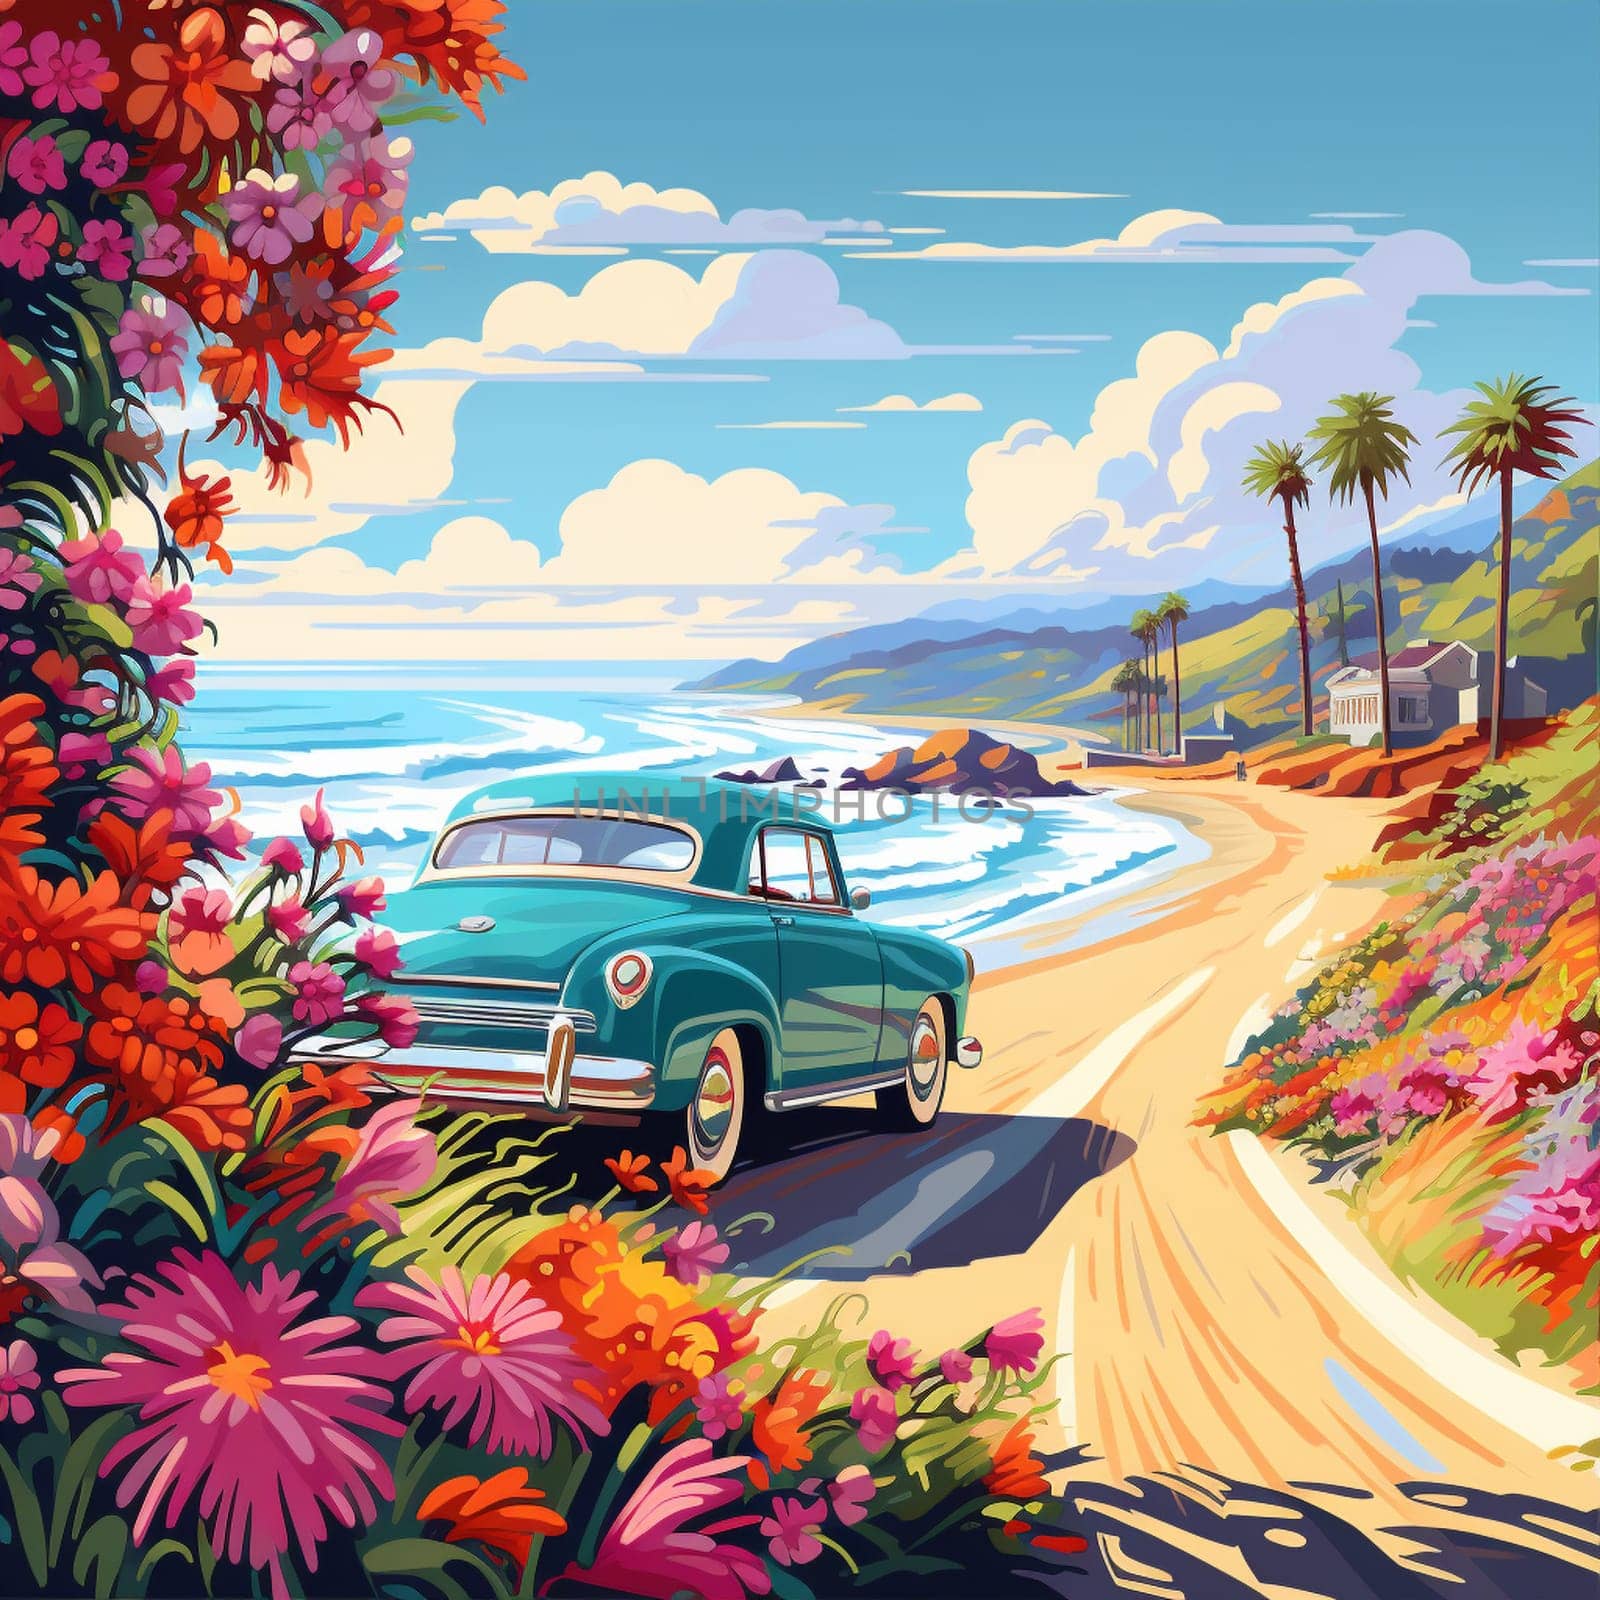 Take a trip back in time with this vibrant image of a vintage car covered in colorful flower decals, cruising down a sunlit coastal road. Reminiscent of retro travel posters from the 1960s, this art style captures the essence of a carefree and adventurous era.